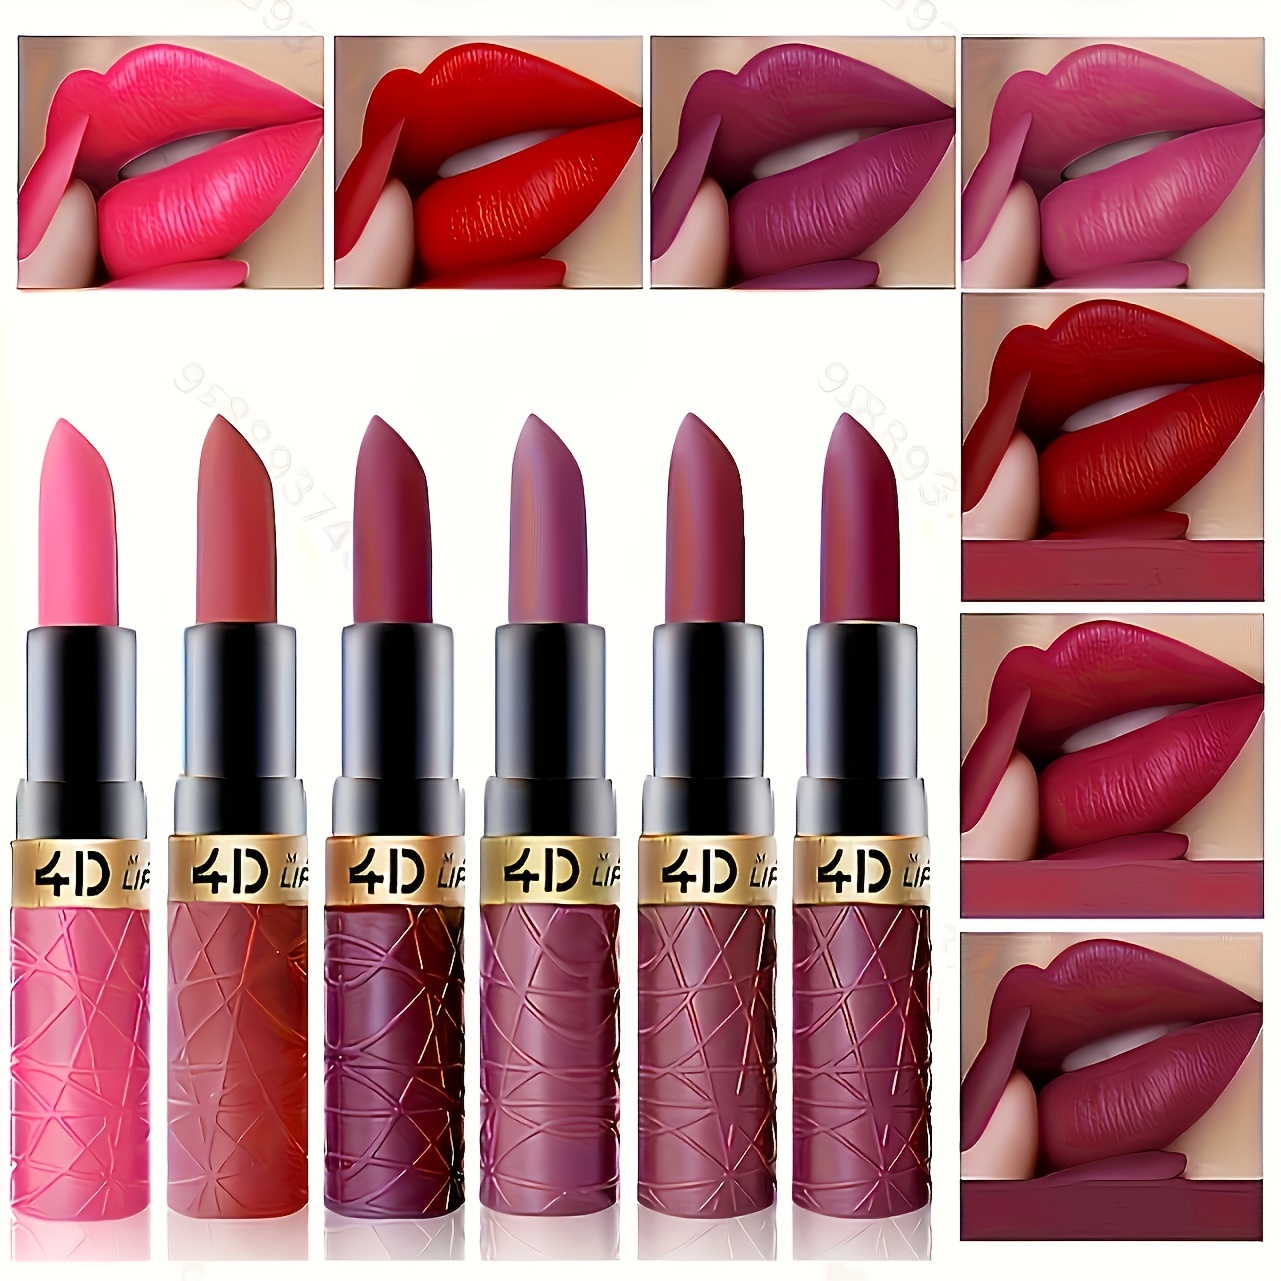 

12 Shades New Starry Sky Lipstick Matte Moisturizing Long-lasting Lip Makeup With Light Fragrance For Adult Women Valentine's Day Gifts